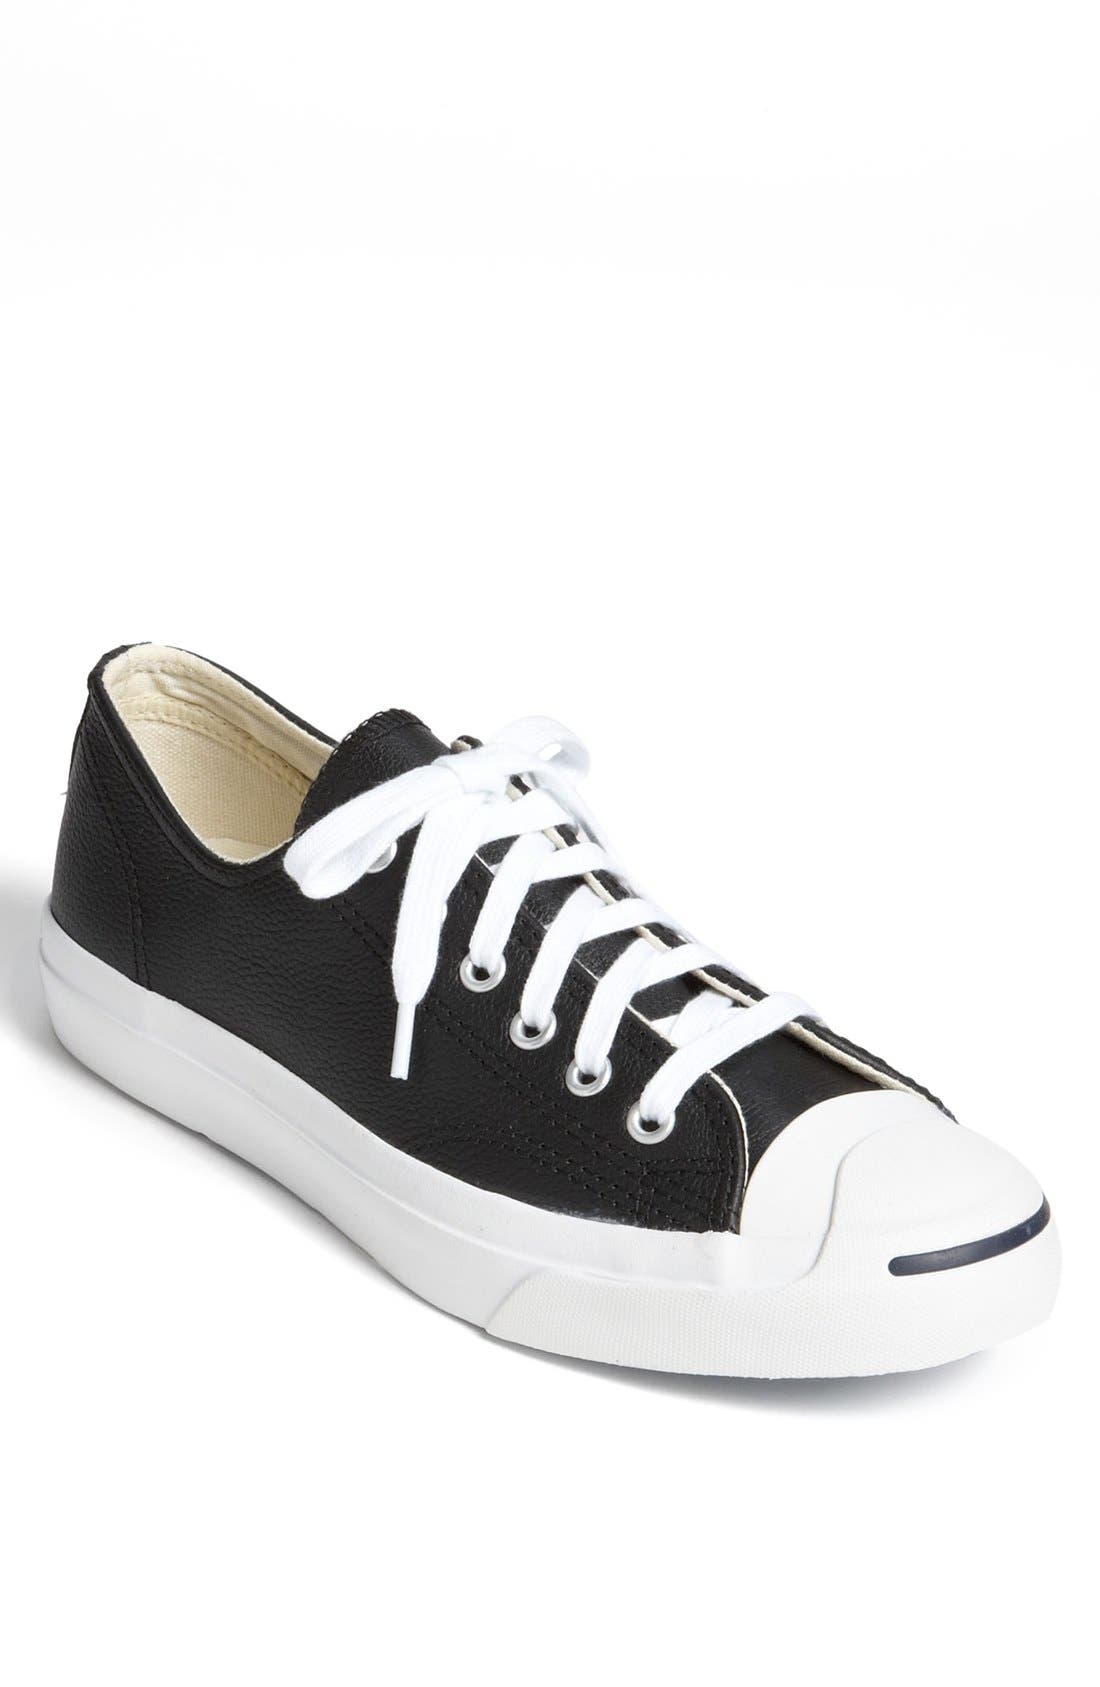 converse purcell leather